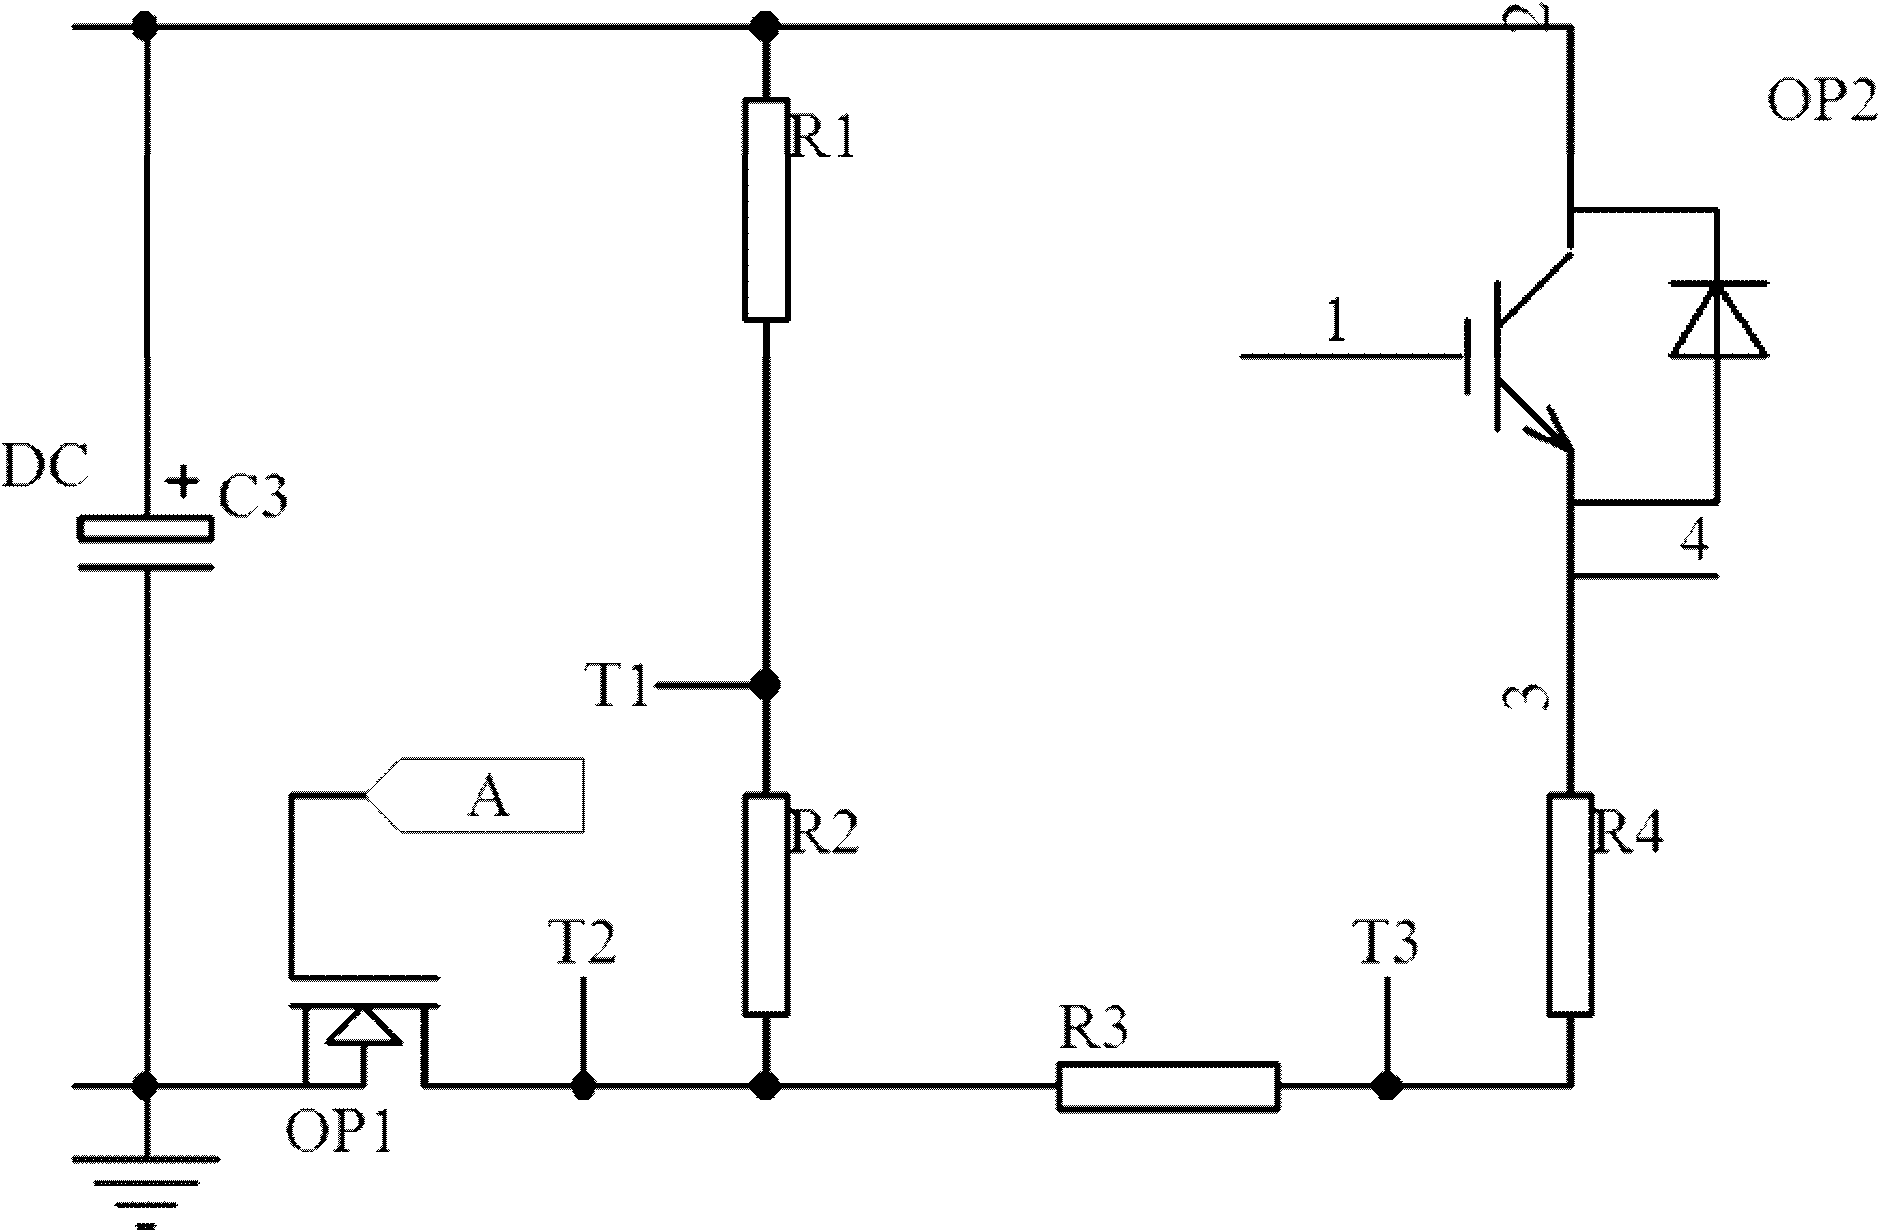 Over-voltage and over-current hardware protection circuit and DC power supply circuit